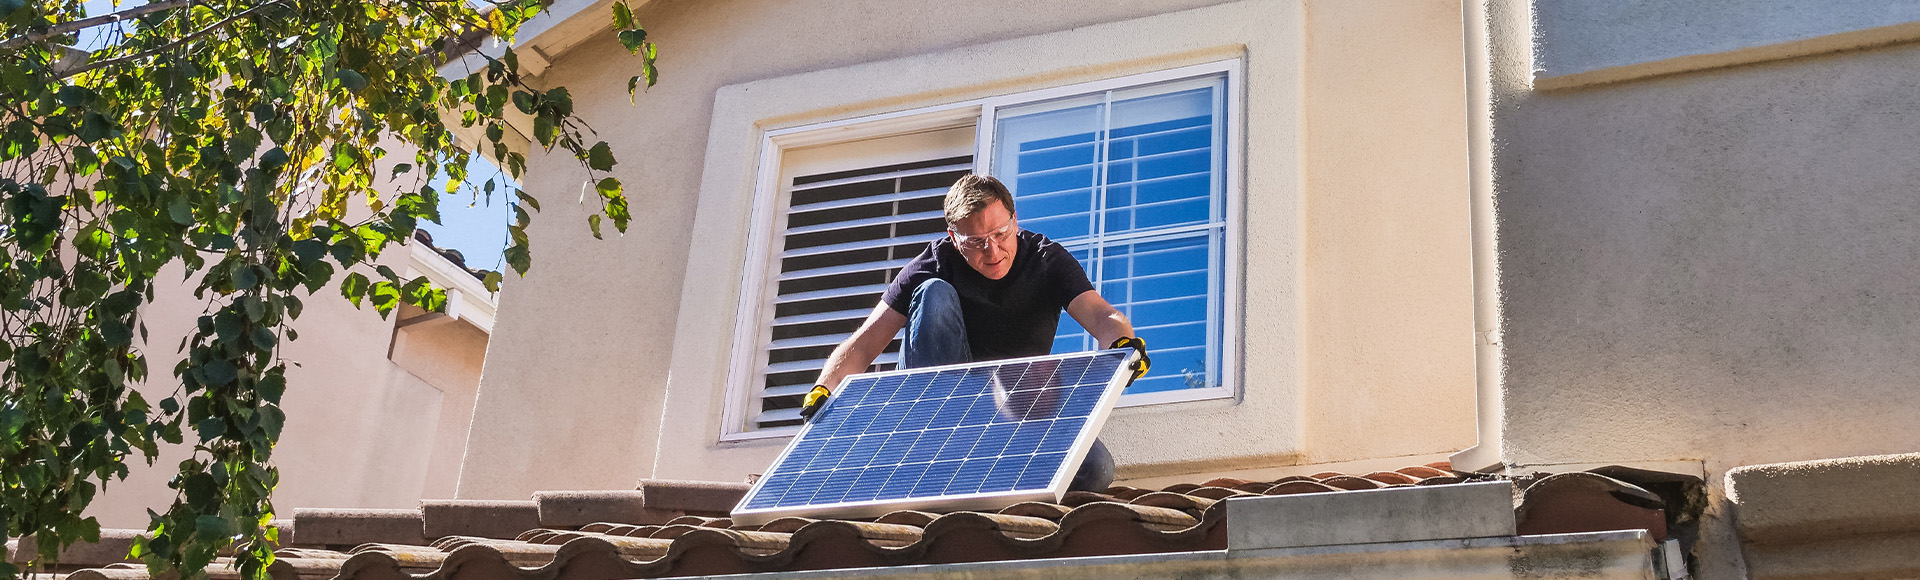 add solar panels to your home to conserve energy